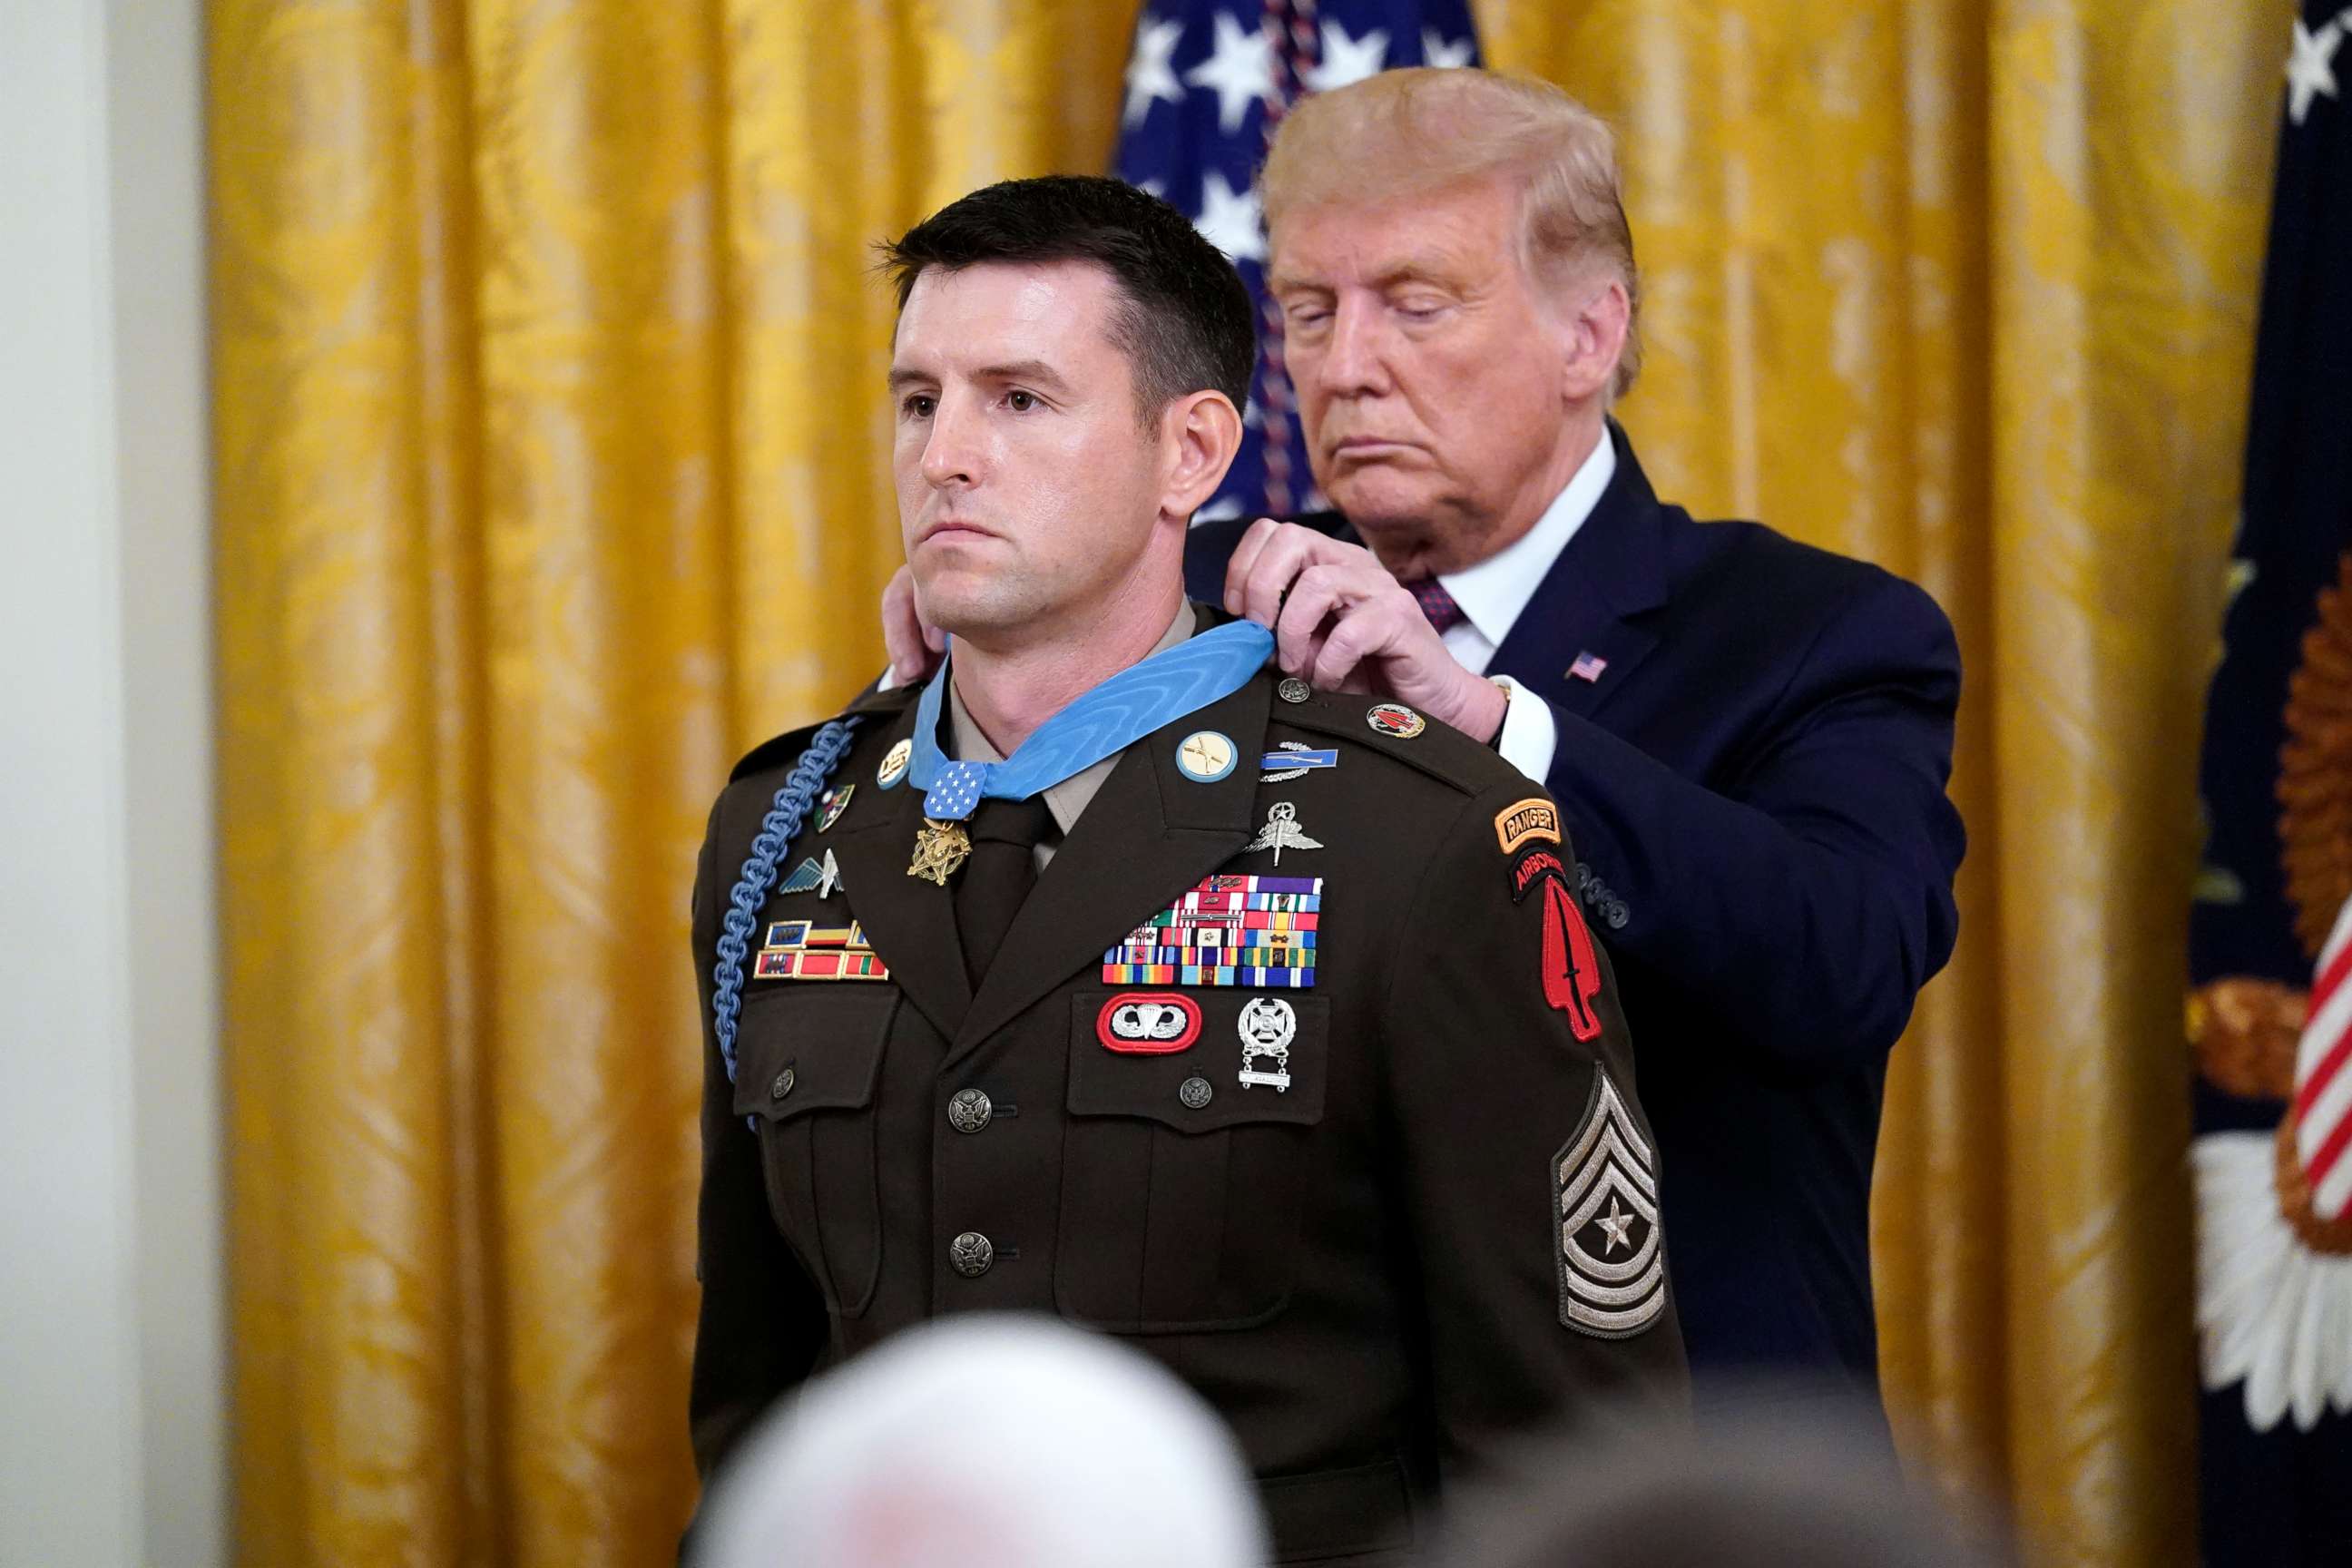 PHOTO: President Donald Trump gives the Medal of Honor to Army Sgt. Maj. Thomas P. Payne in the East Room of the White House on Sept. 11, 2020, in Washington.